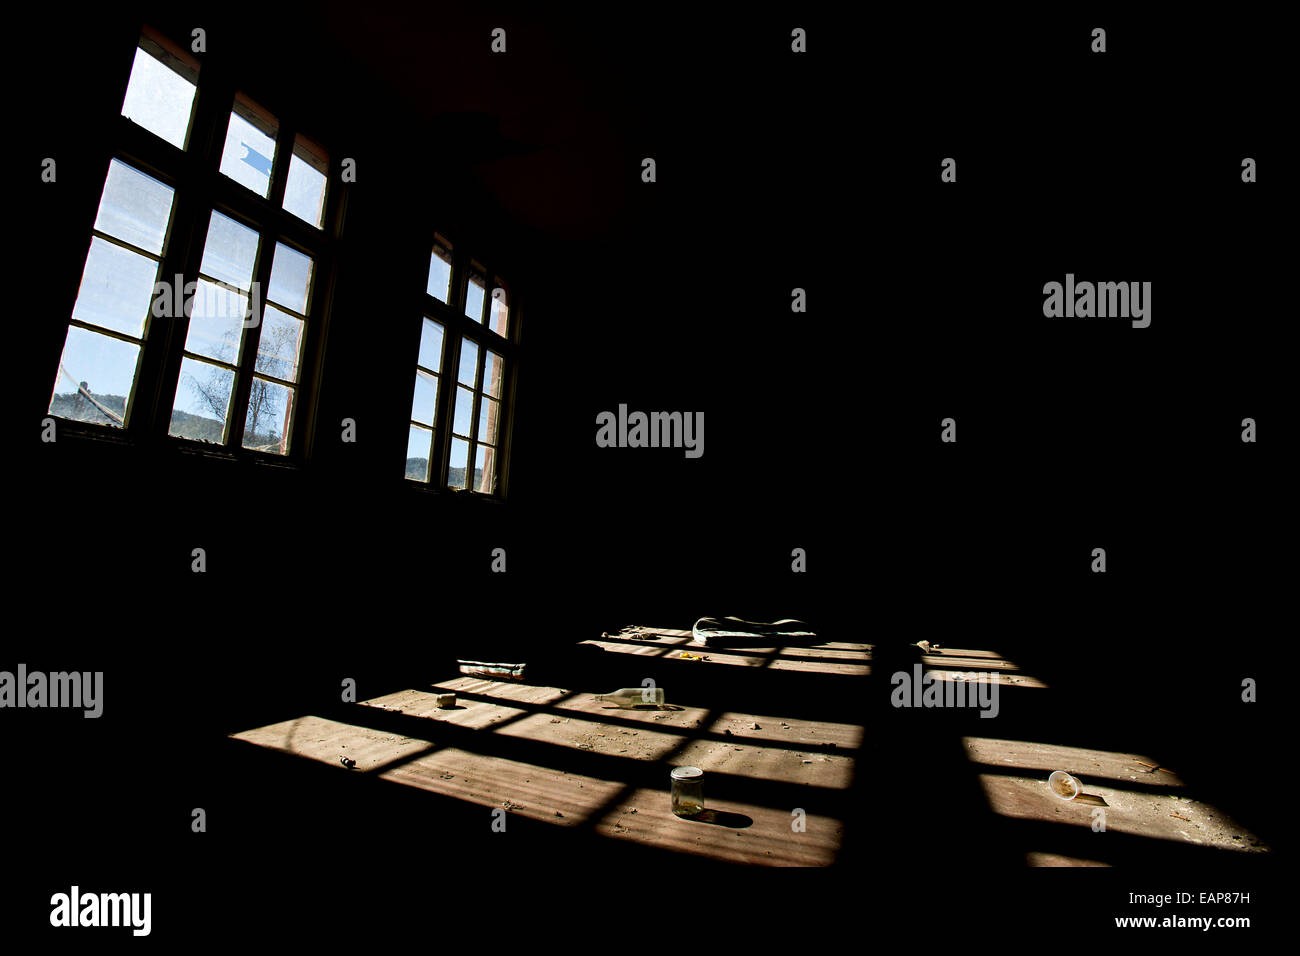 Abandoned school after an earthquake years ago. Stock Photo